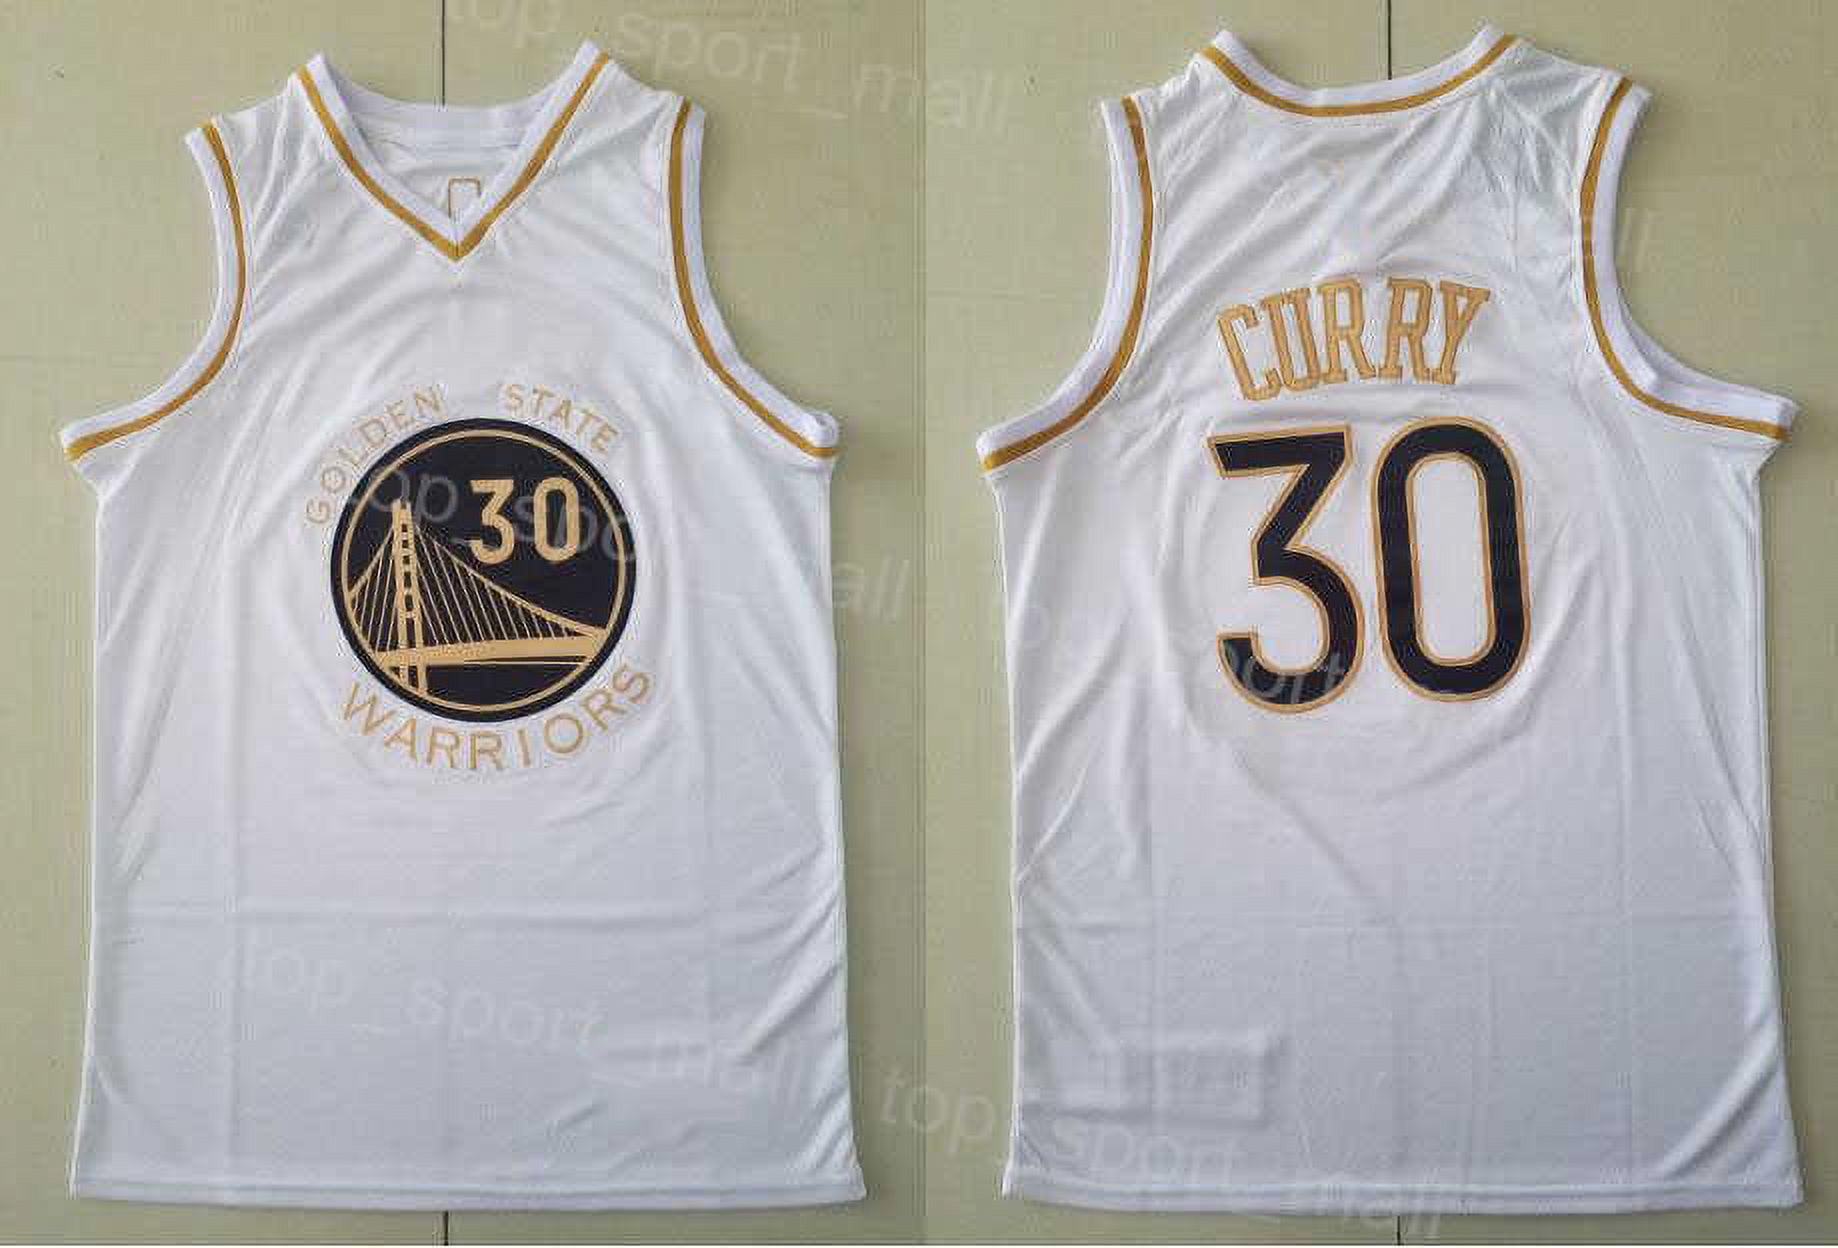 steph curry blue jersey